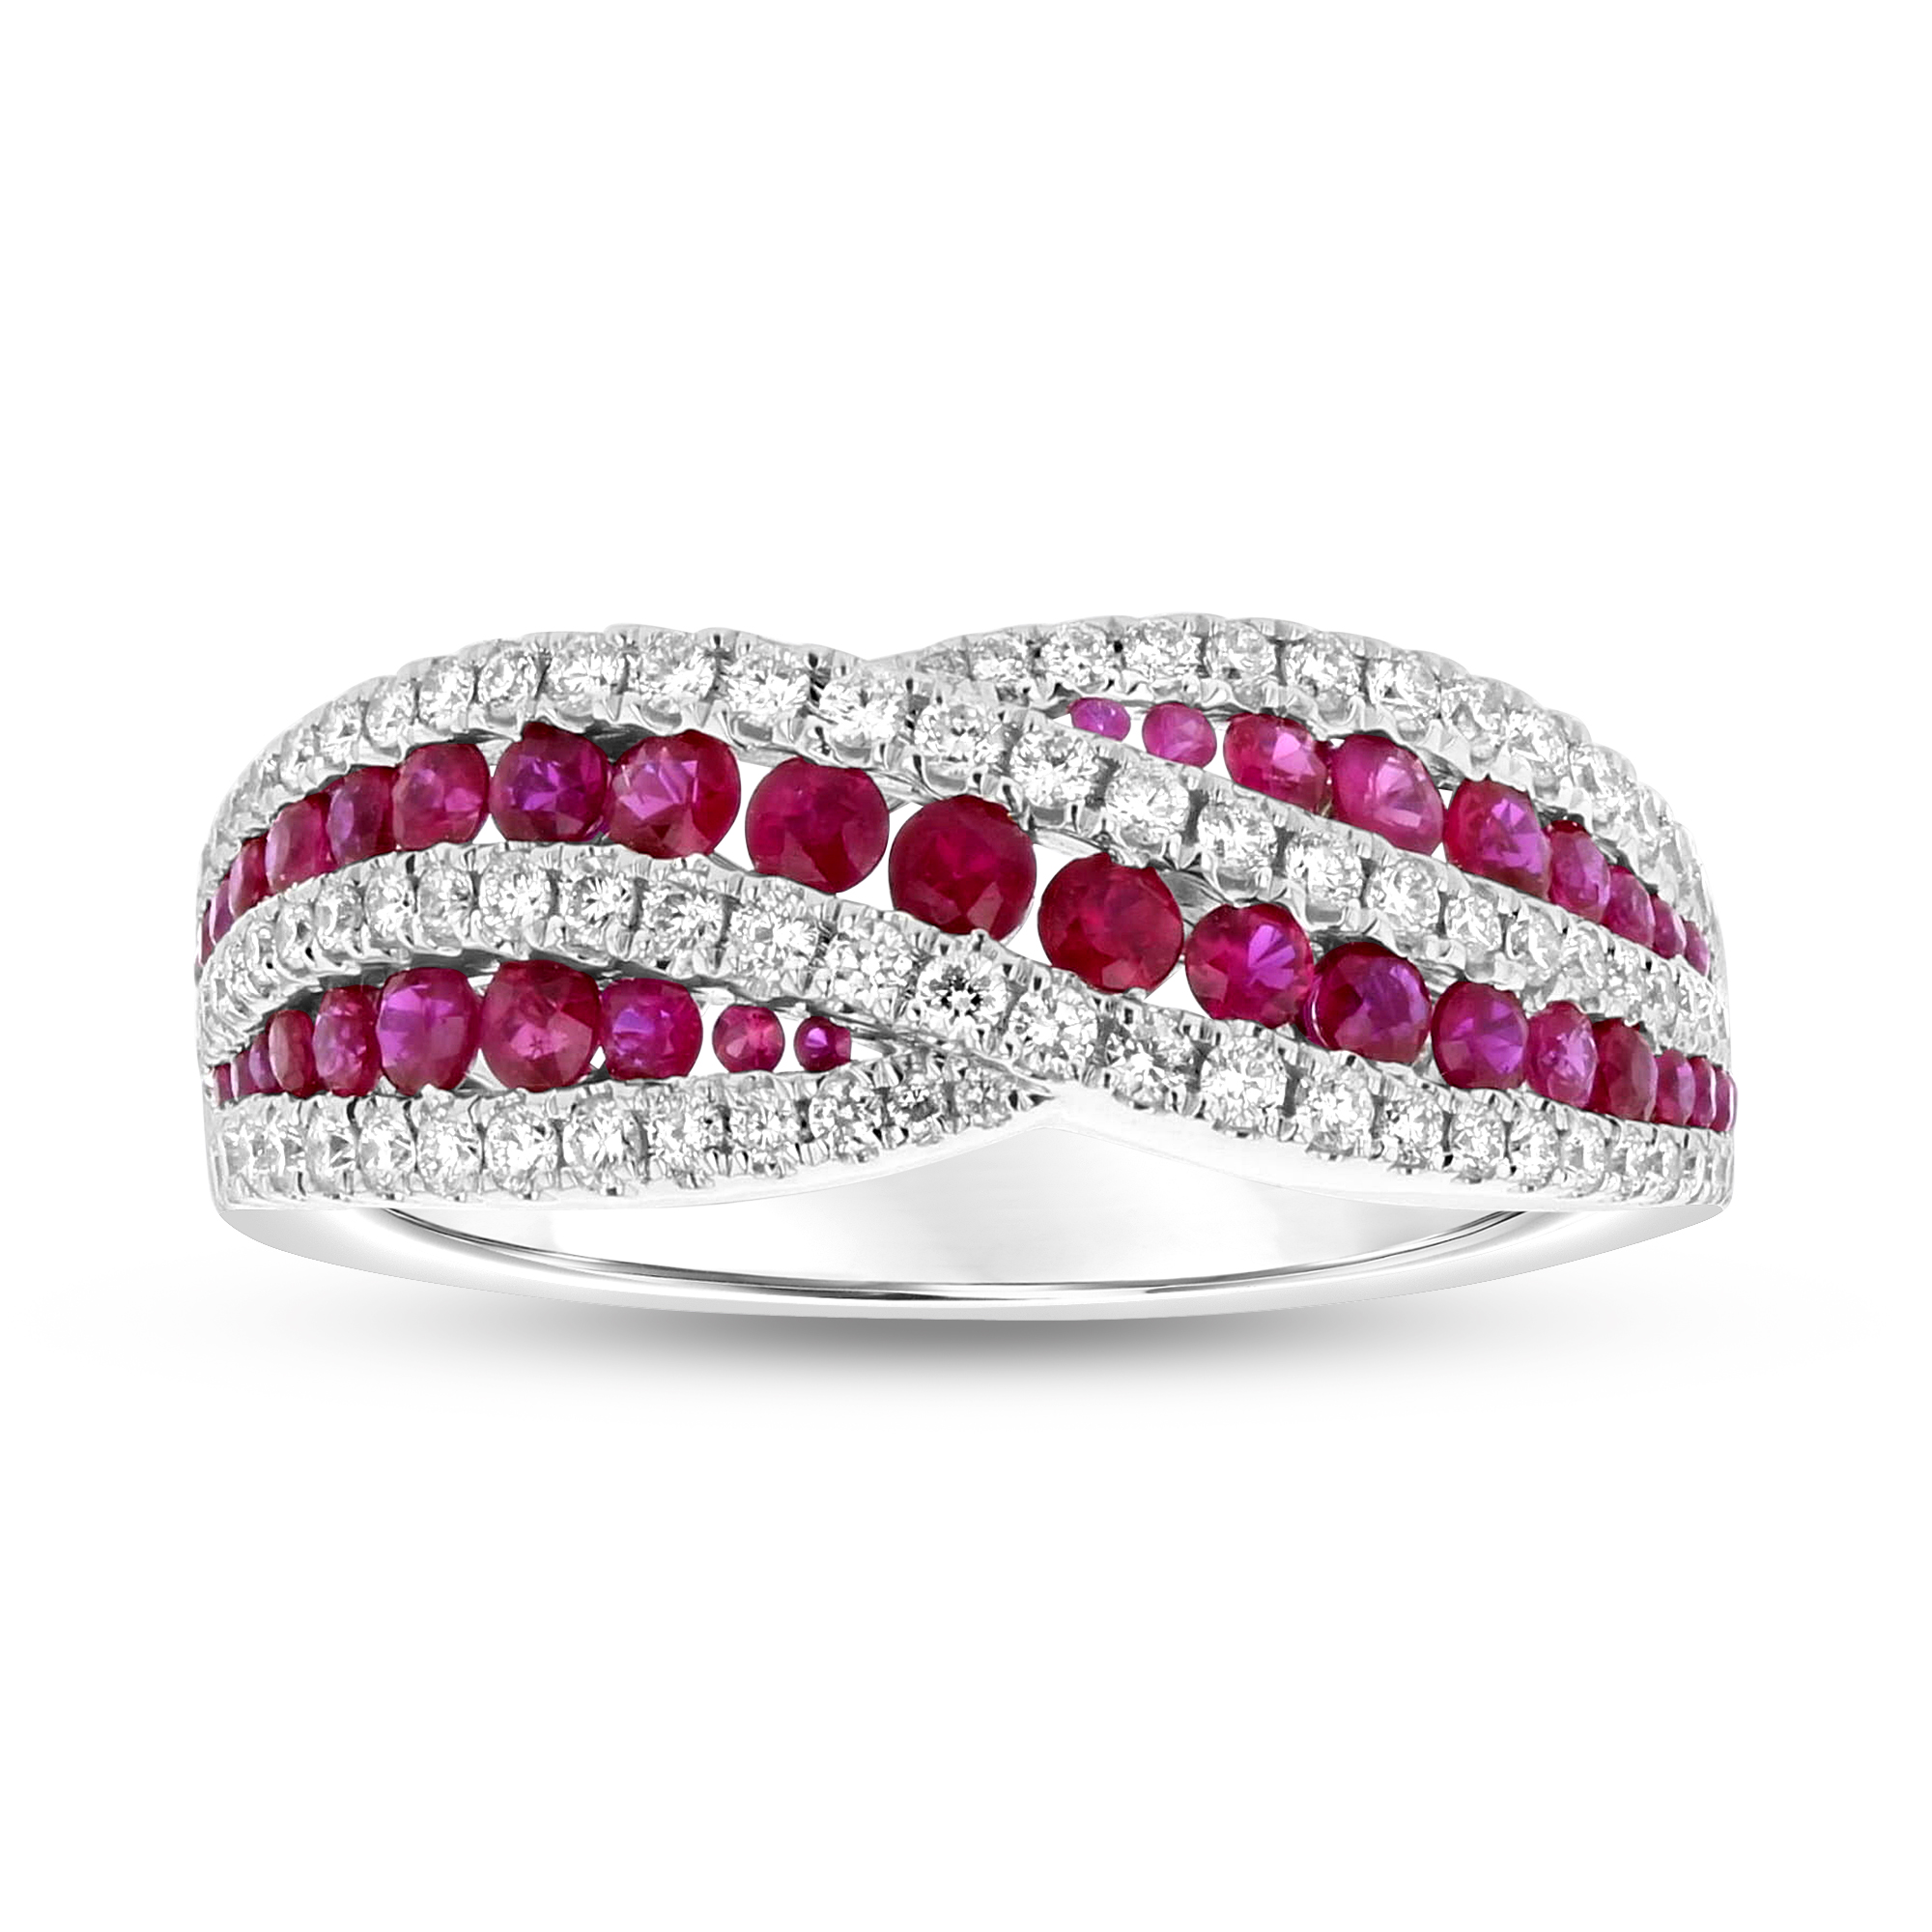 1.30ctw Diamond and Ruby Ring in 18k White Gold